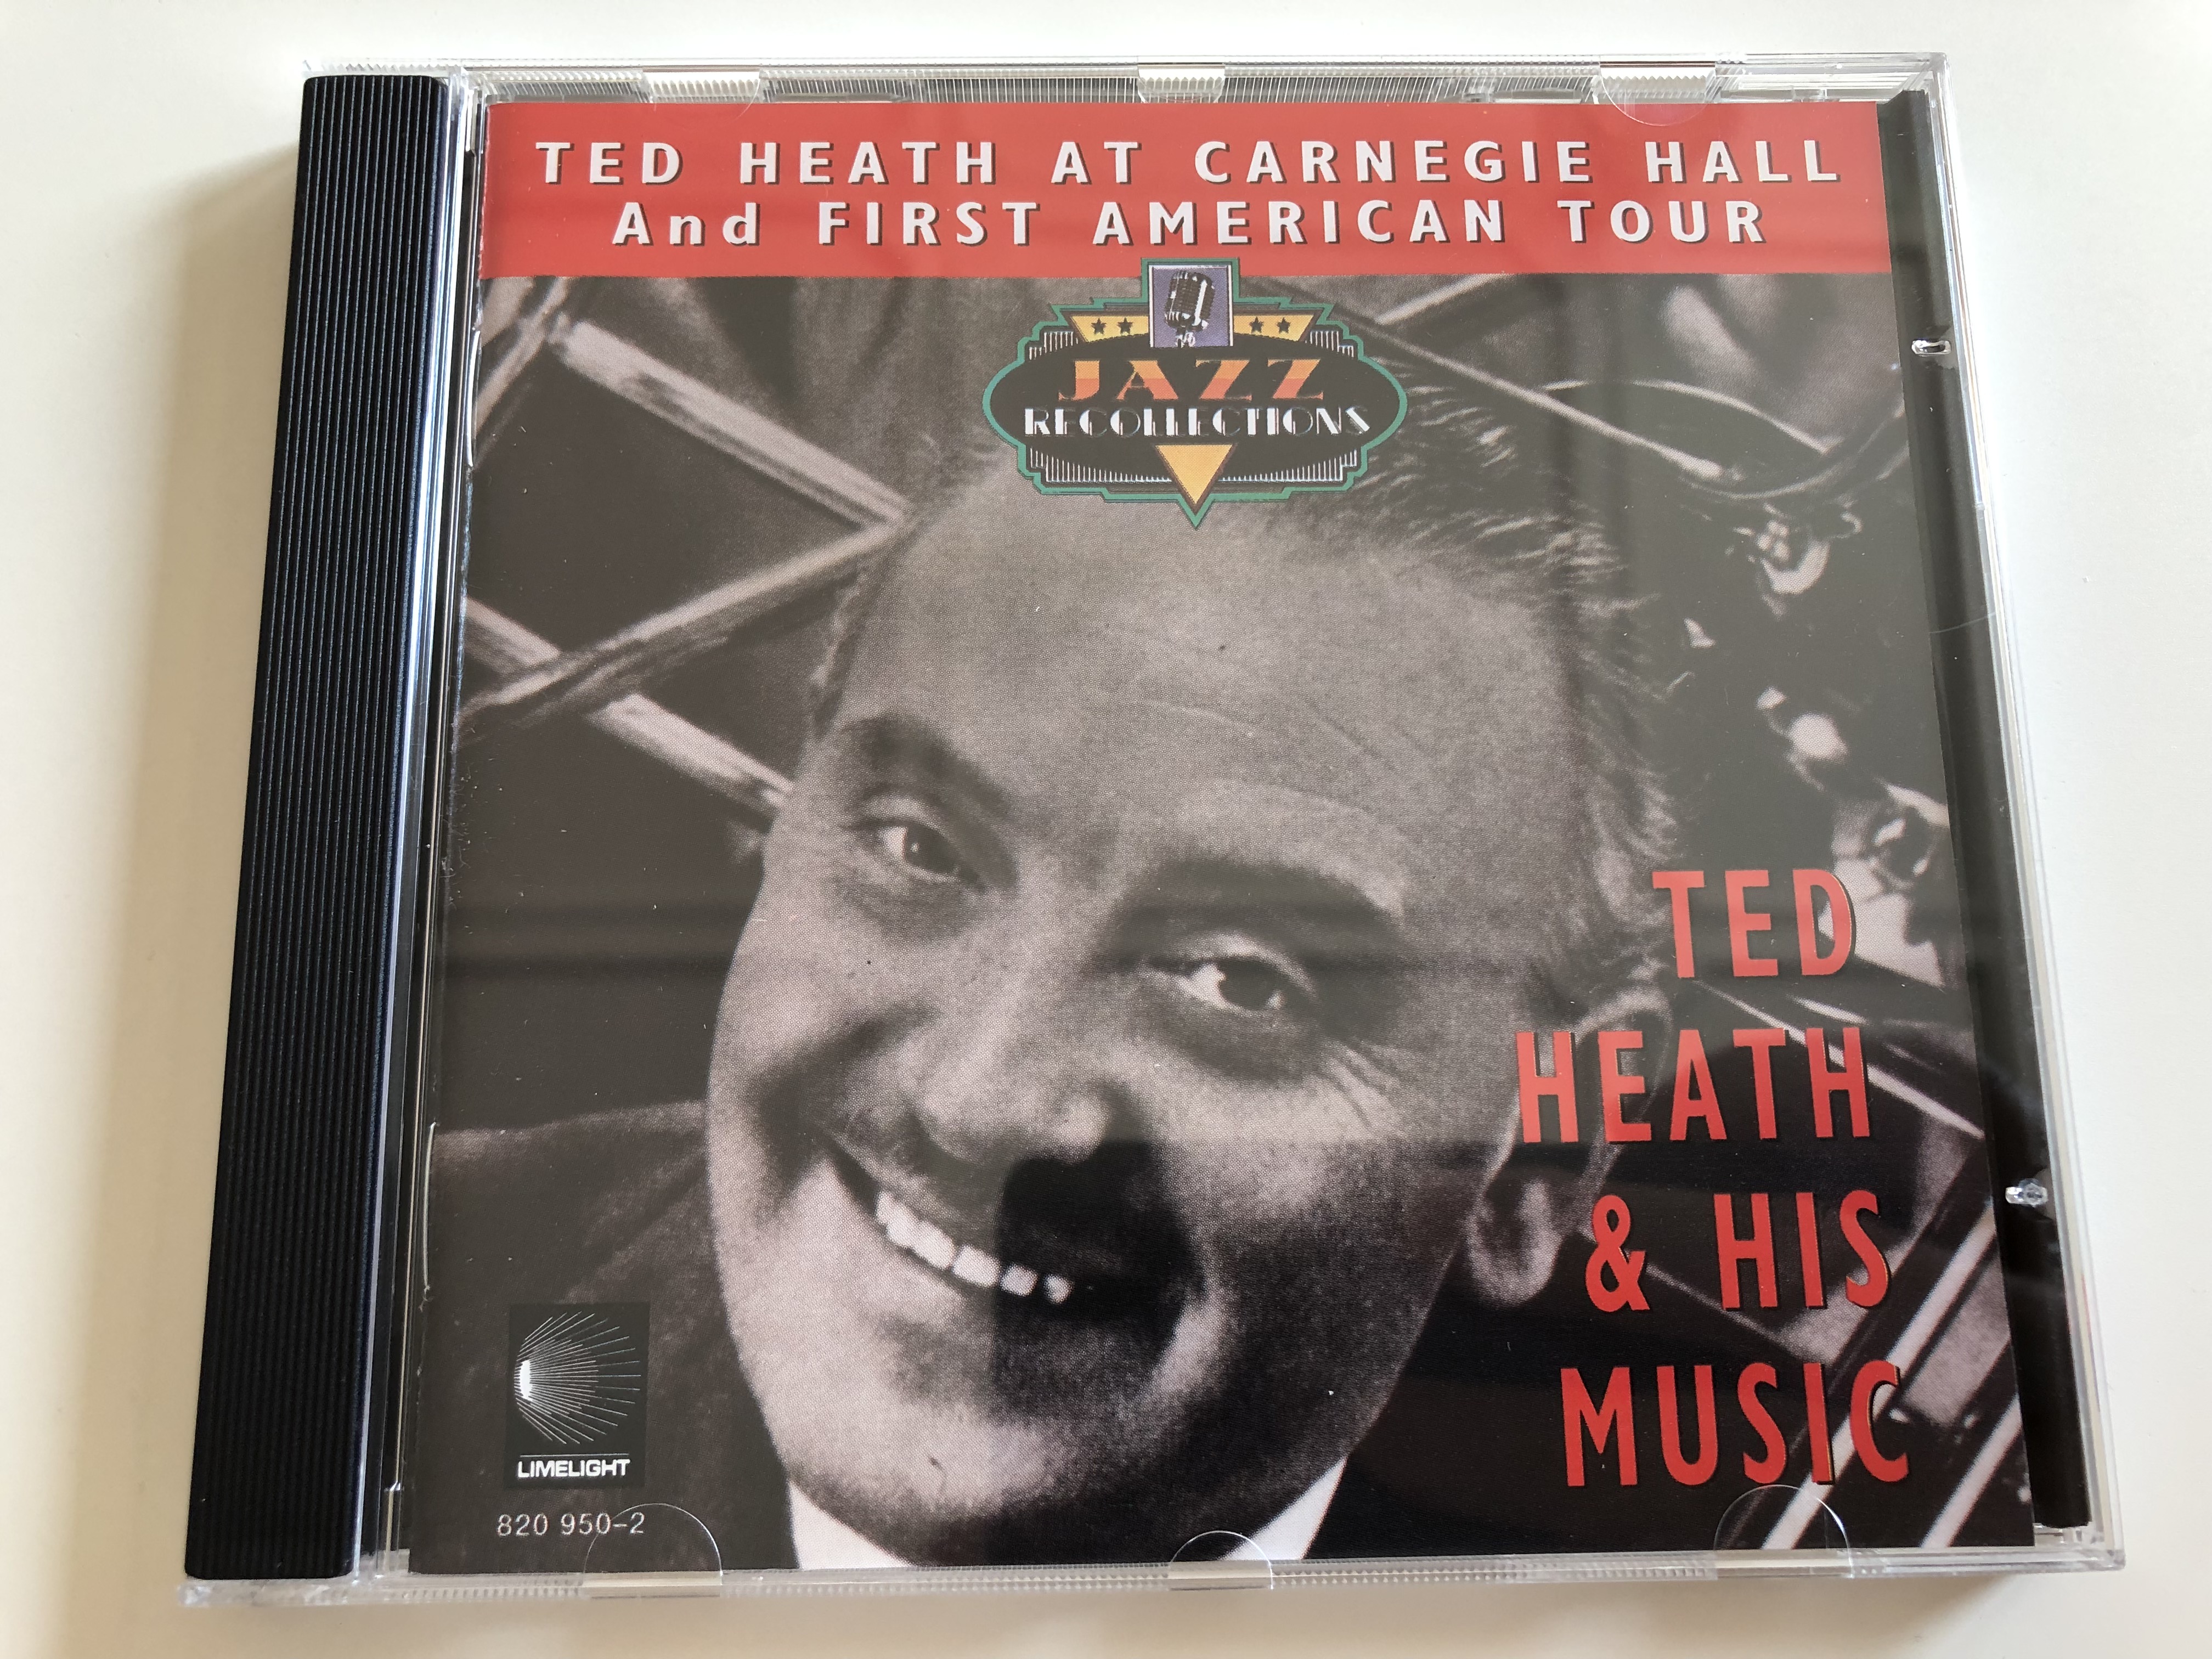 ted-heath-at-carnegie-hall-and-first-american-tour-ted-heath-his-music-limelight-audio-cd-820-950-2-1-.jpg